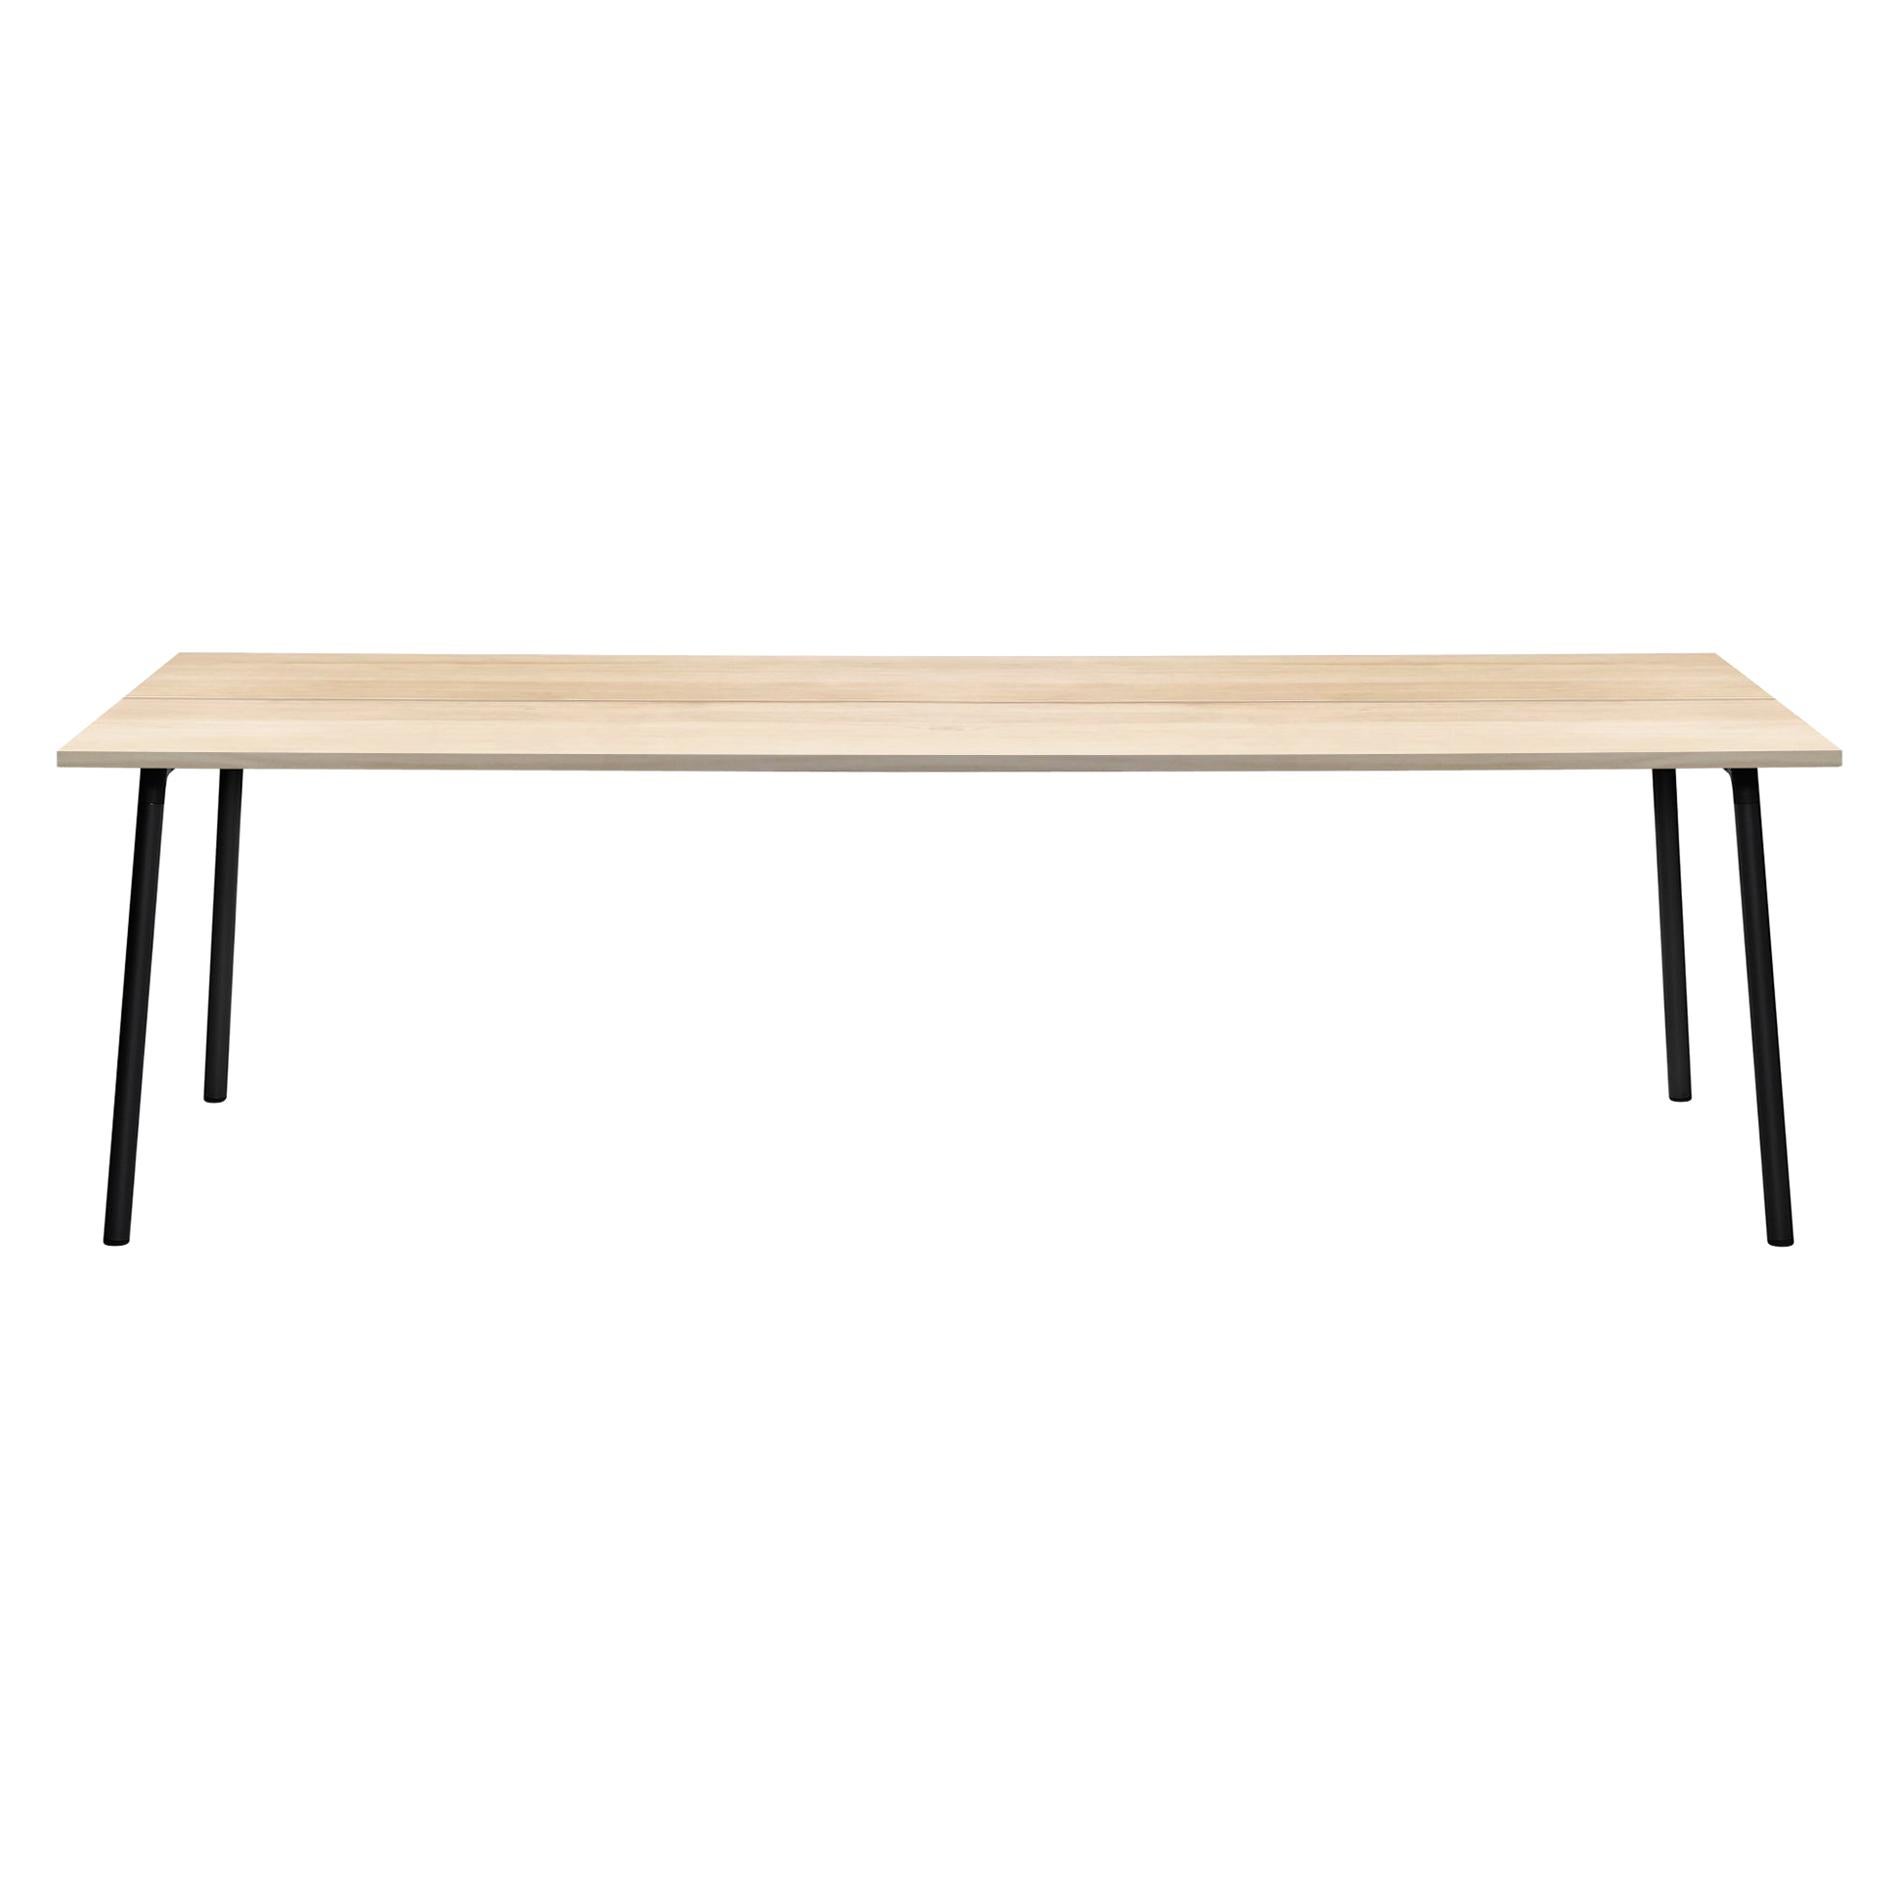 Emeco Run 96" Table with Black Frame & Wood Top by Sam Hecht and Kim Colin